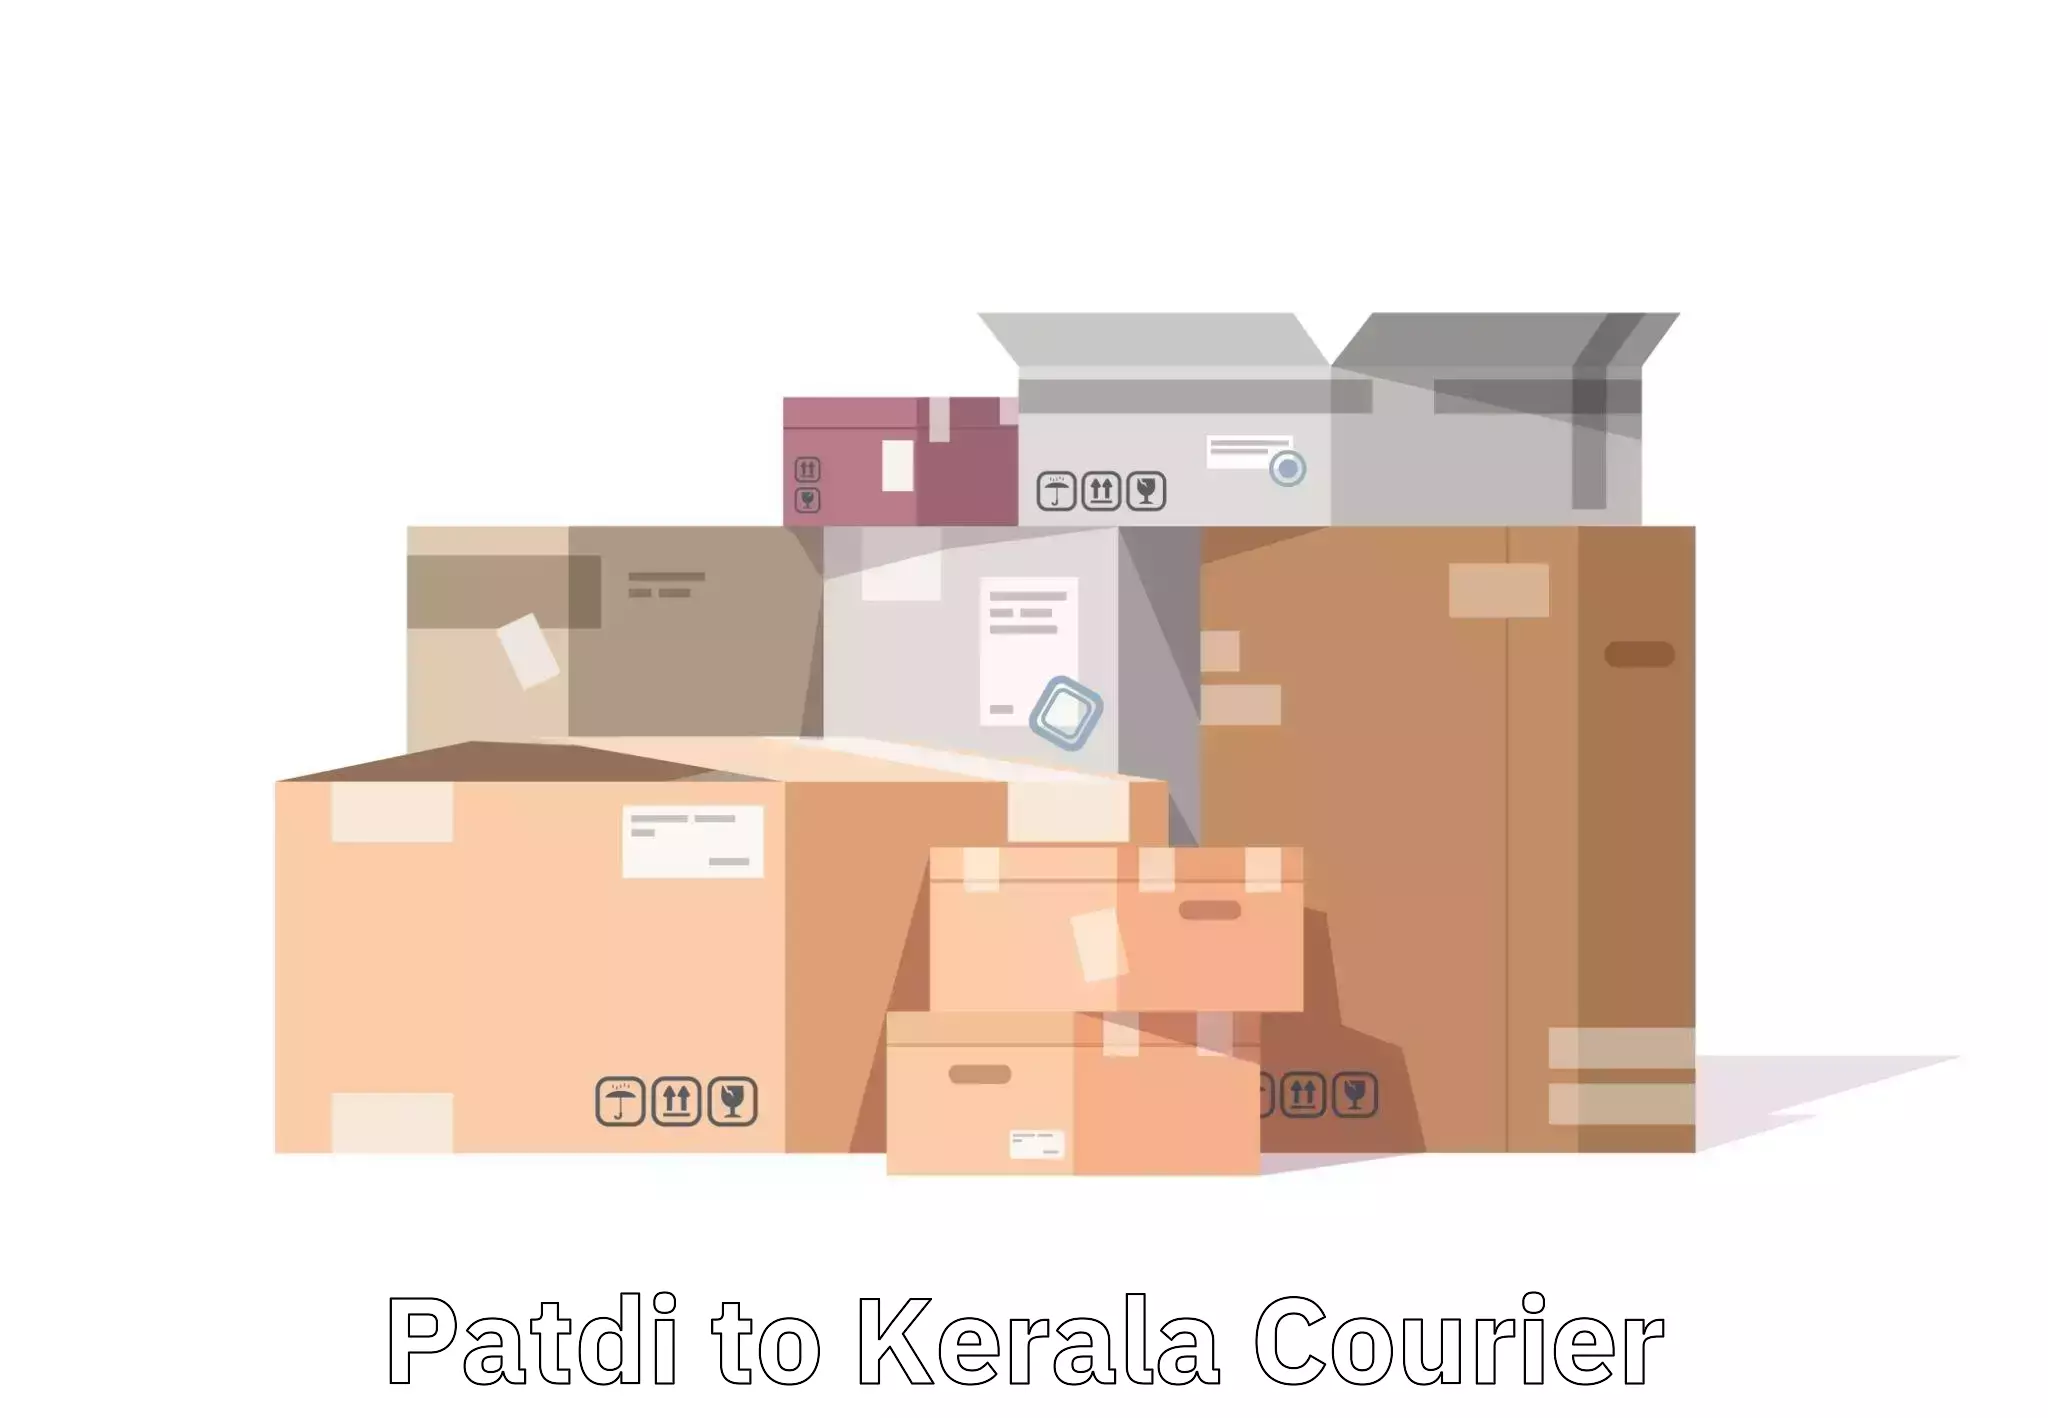 International baggage delivery Patdi to Cochin University of Science and Technology